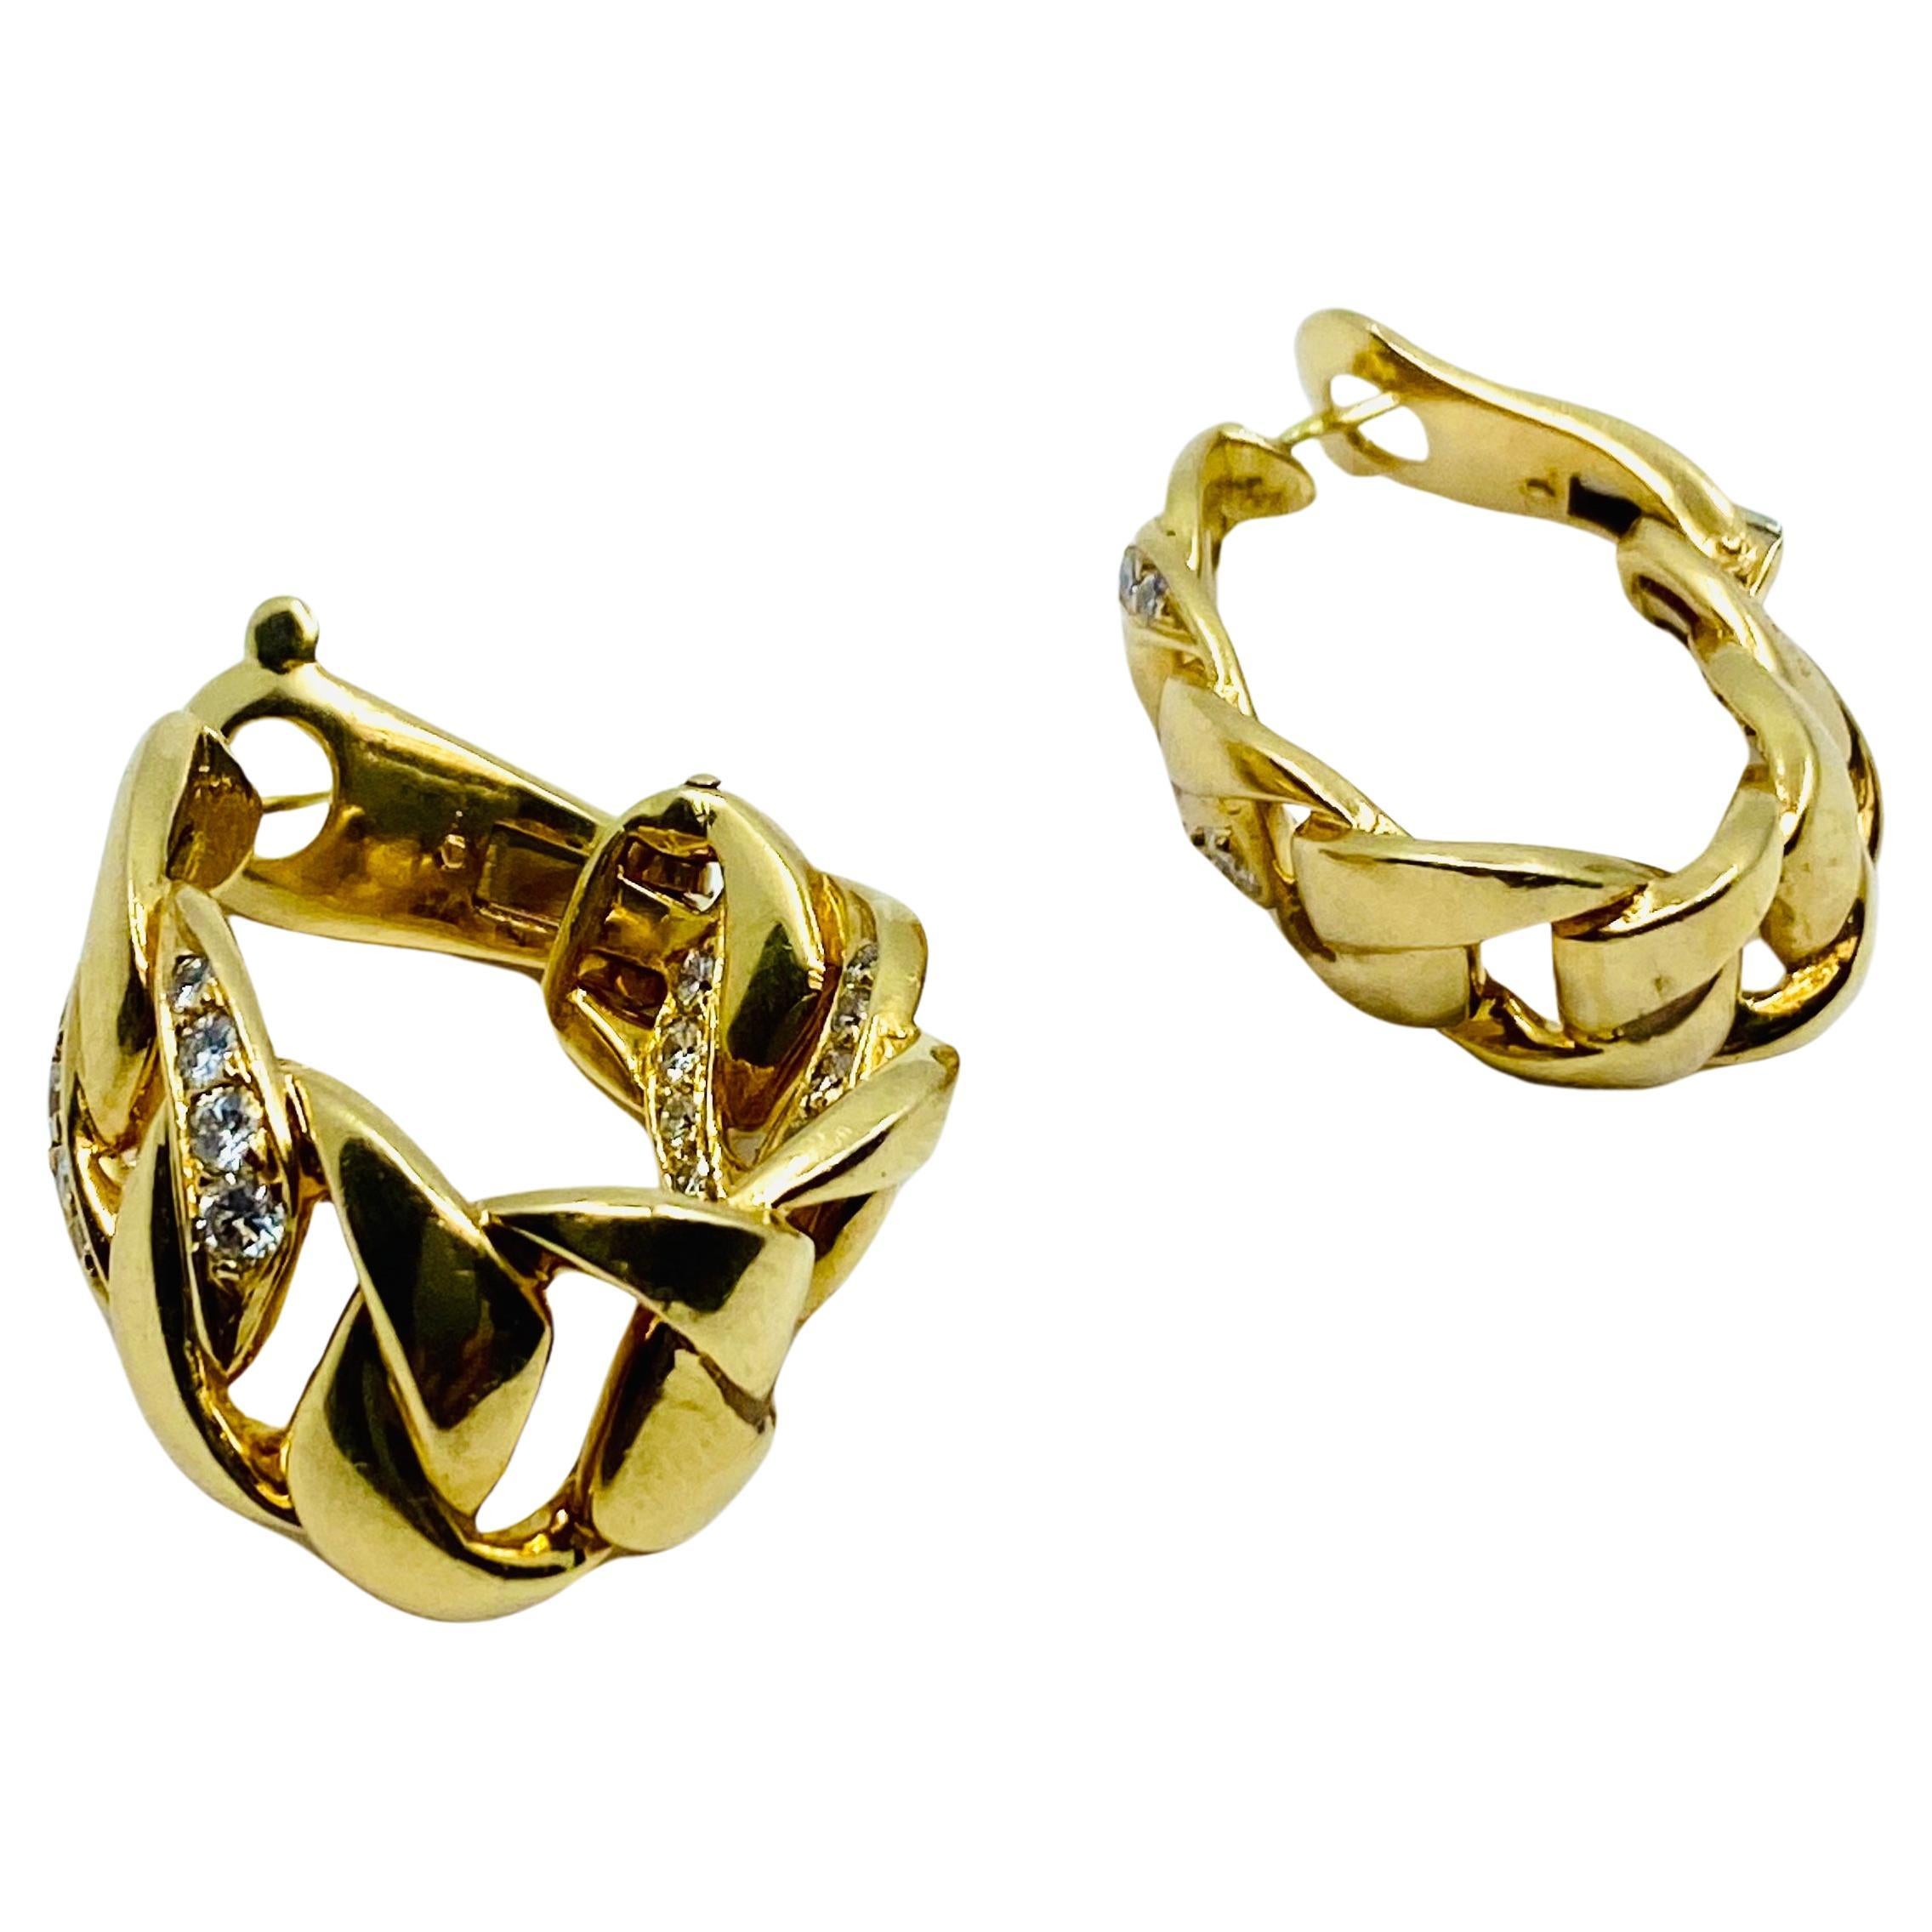 Cartier Diamond Bergamo Gold Hoop Earrings In Excellent Condition For Sale In Beverly Hills, CA